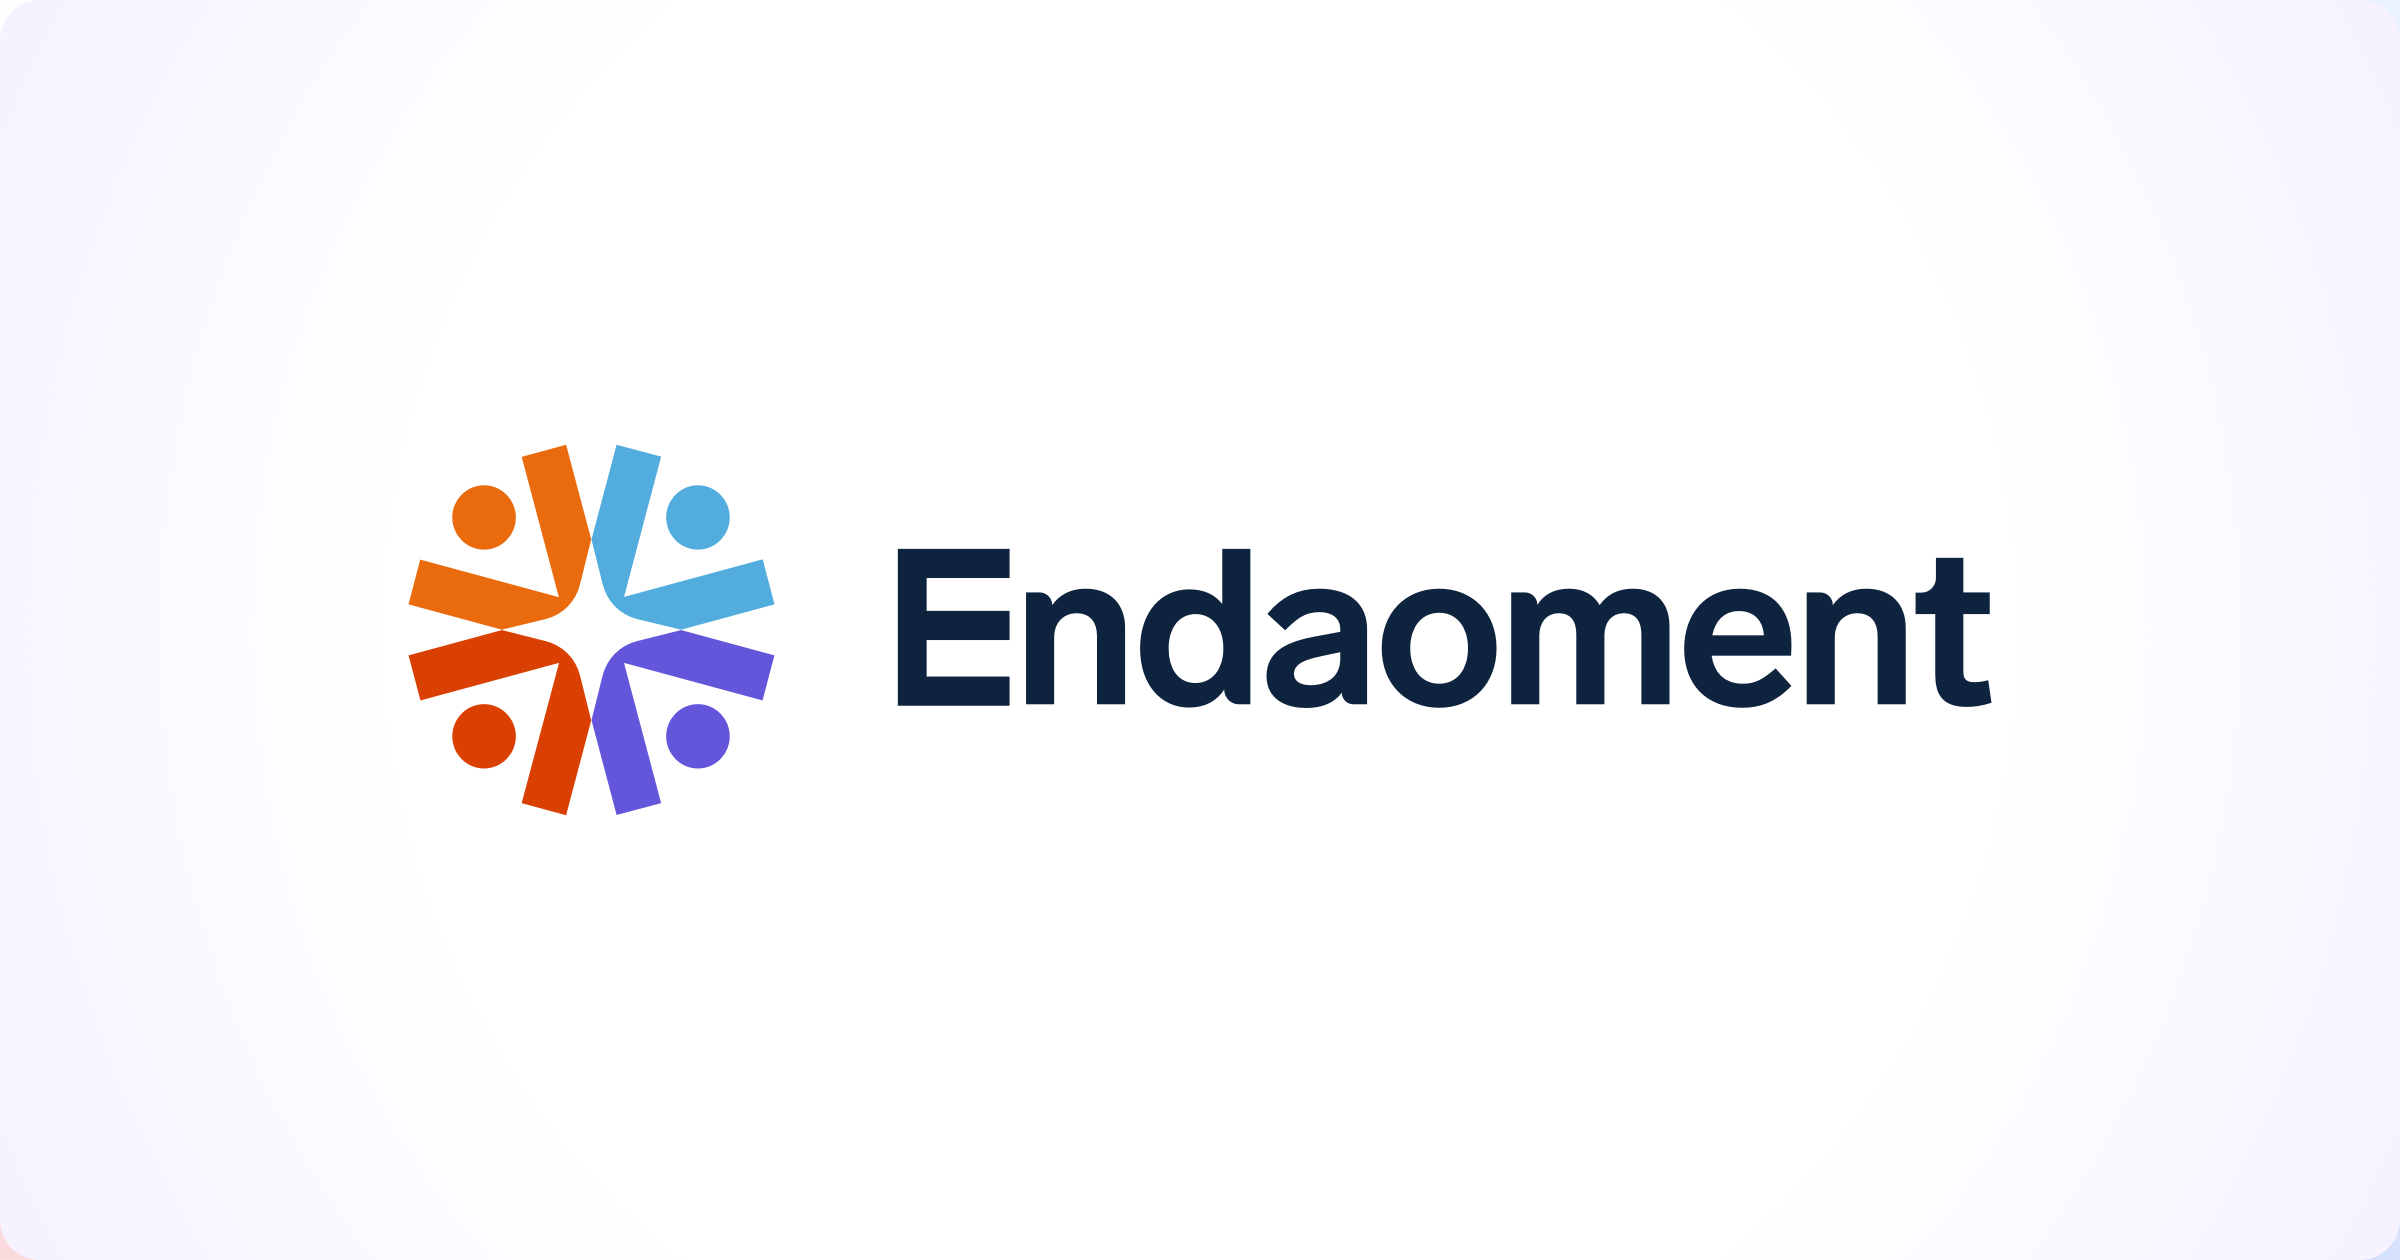 Endaoment uses USD Coin (USDC) to pioneer a new digital fundraising model